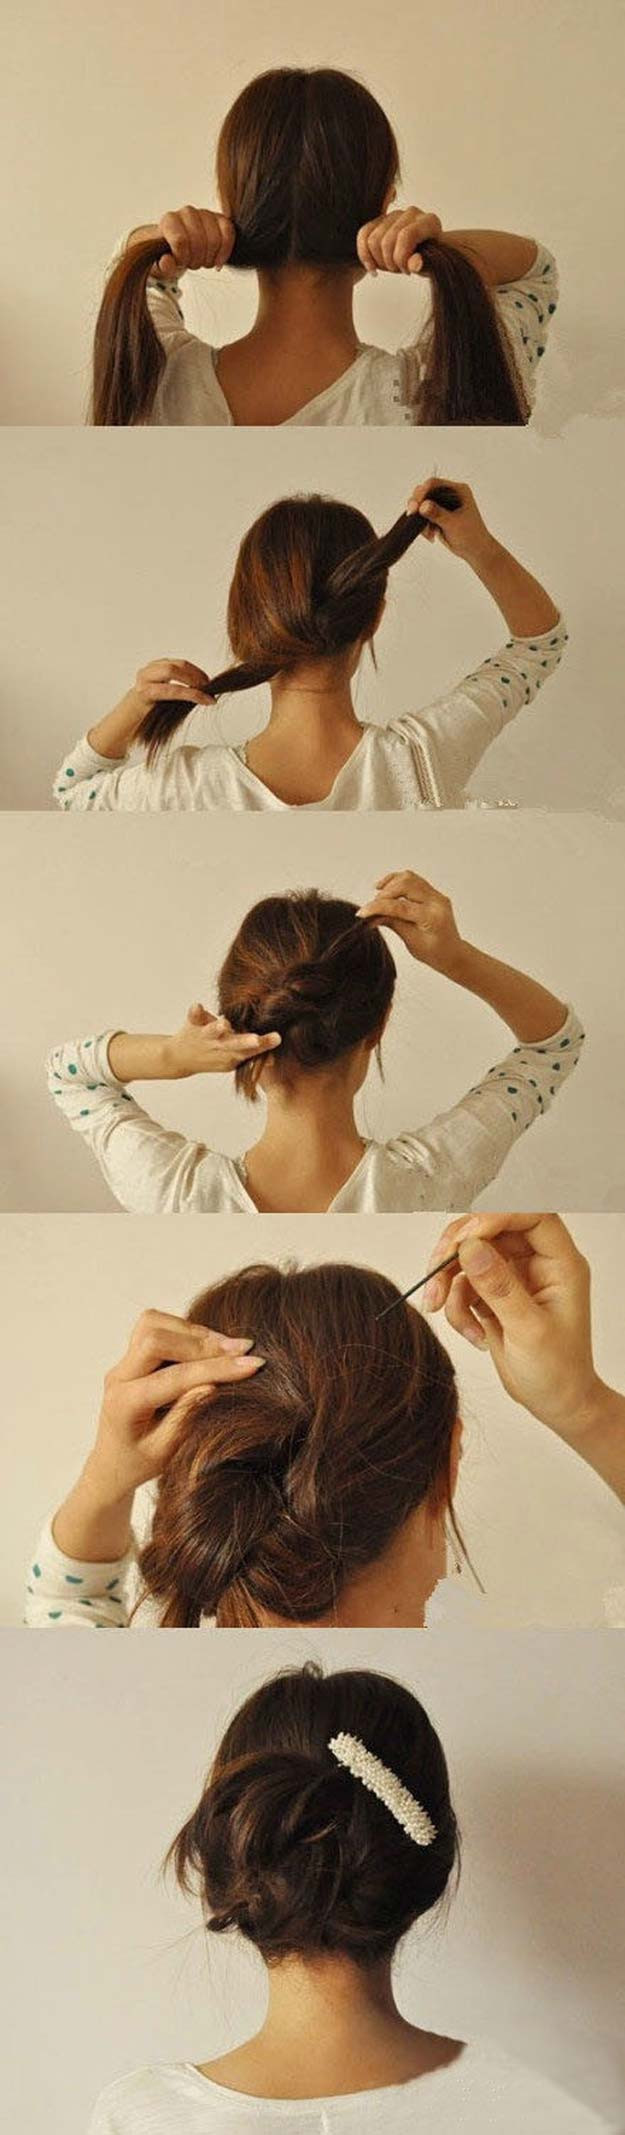 Diy Hairstyle For Long Hair
 36 Best Hairstyles for Long Hair DIY Projects for Teens